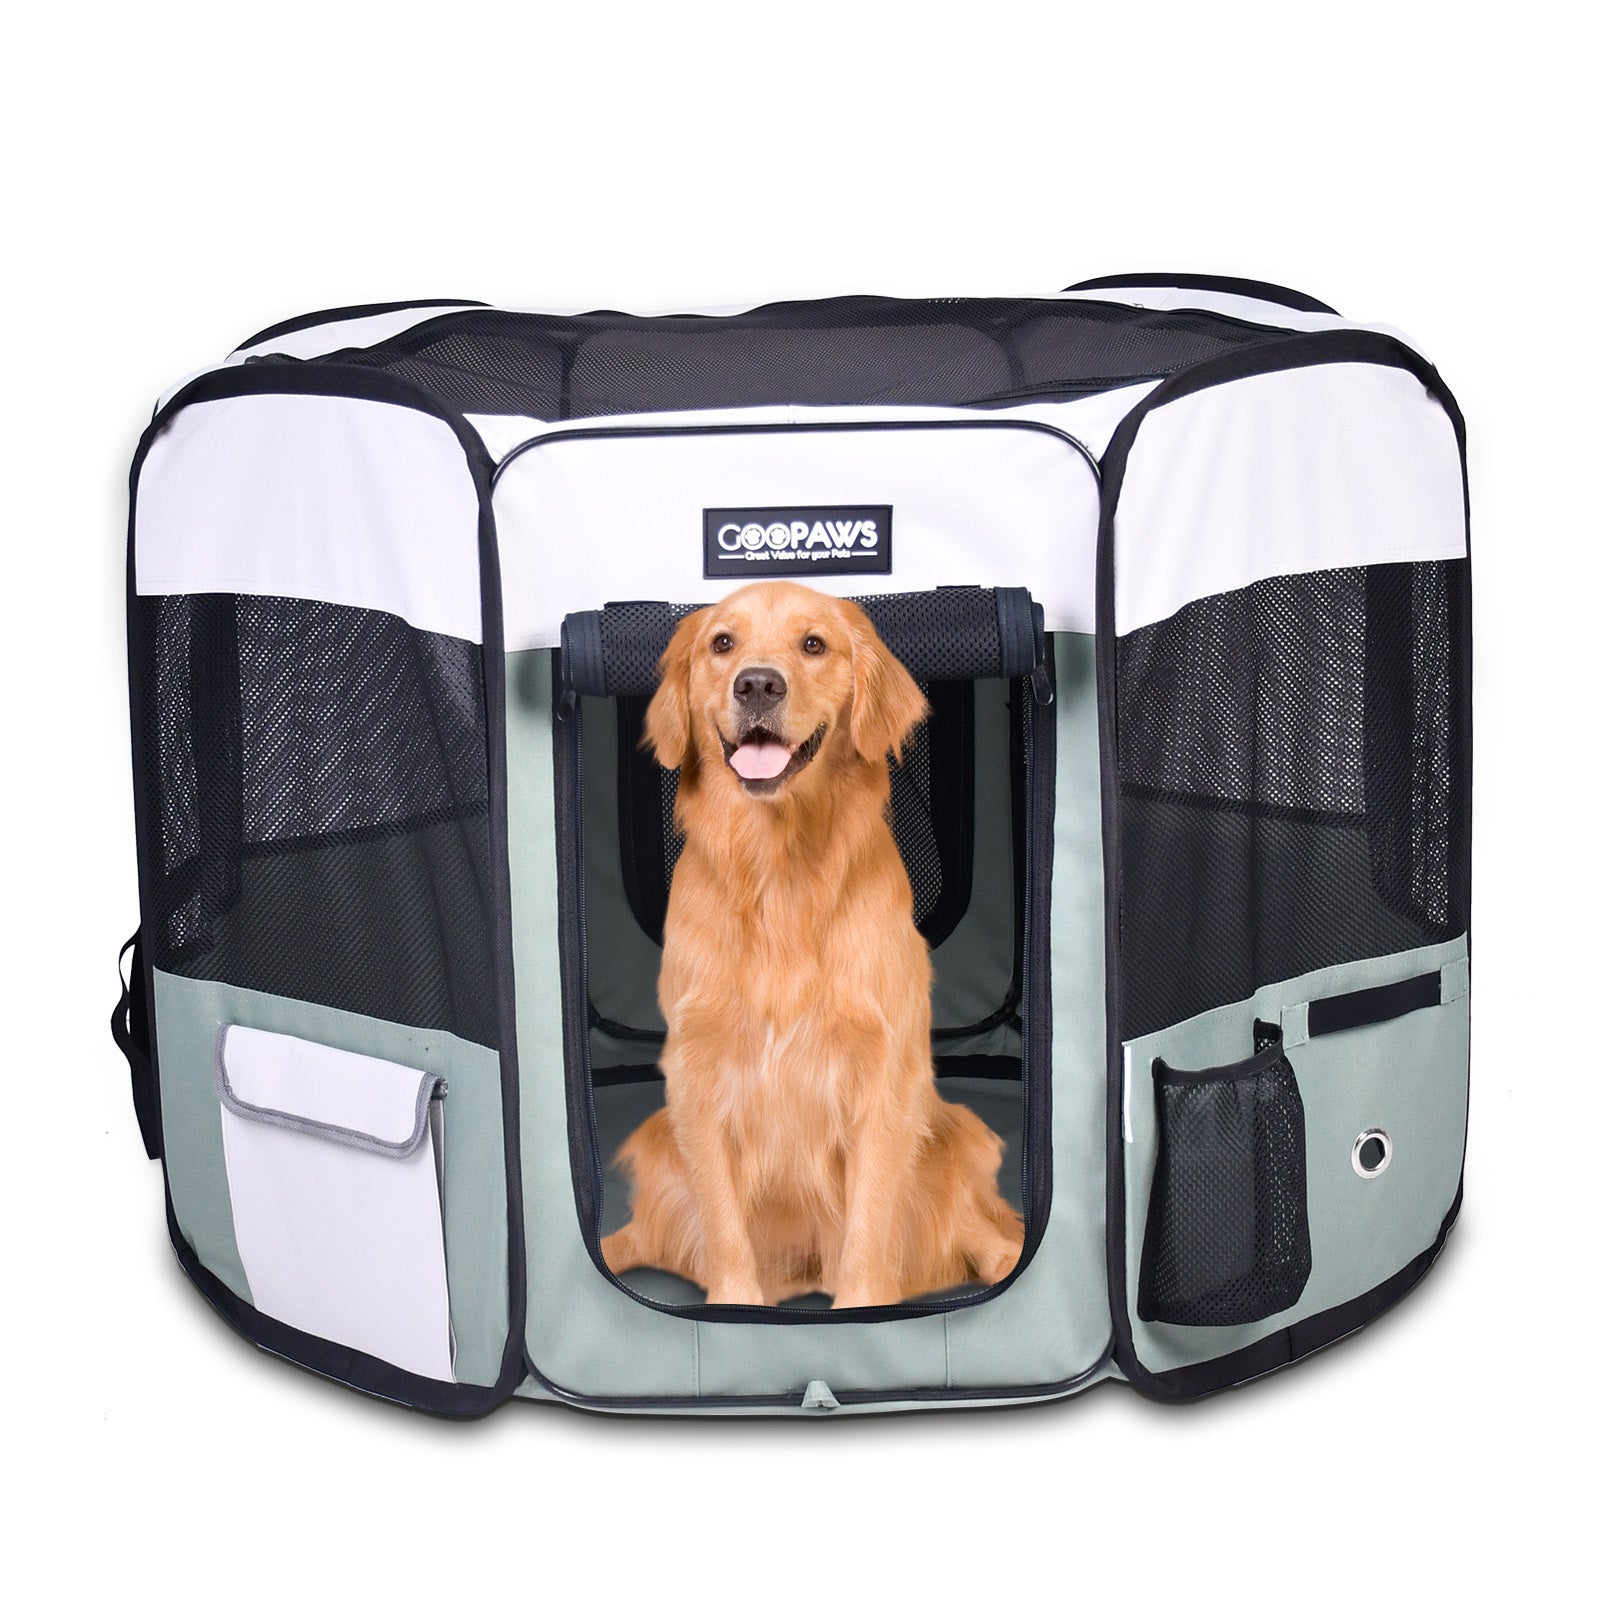 Jespet 2-Door Portable Soft-Sided Dog, Cat & Small Pet Exercise Playpen, Green, 61''